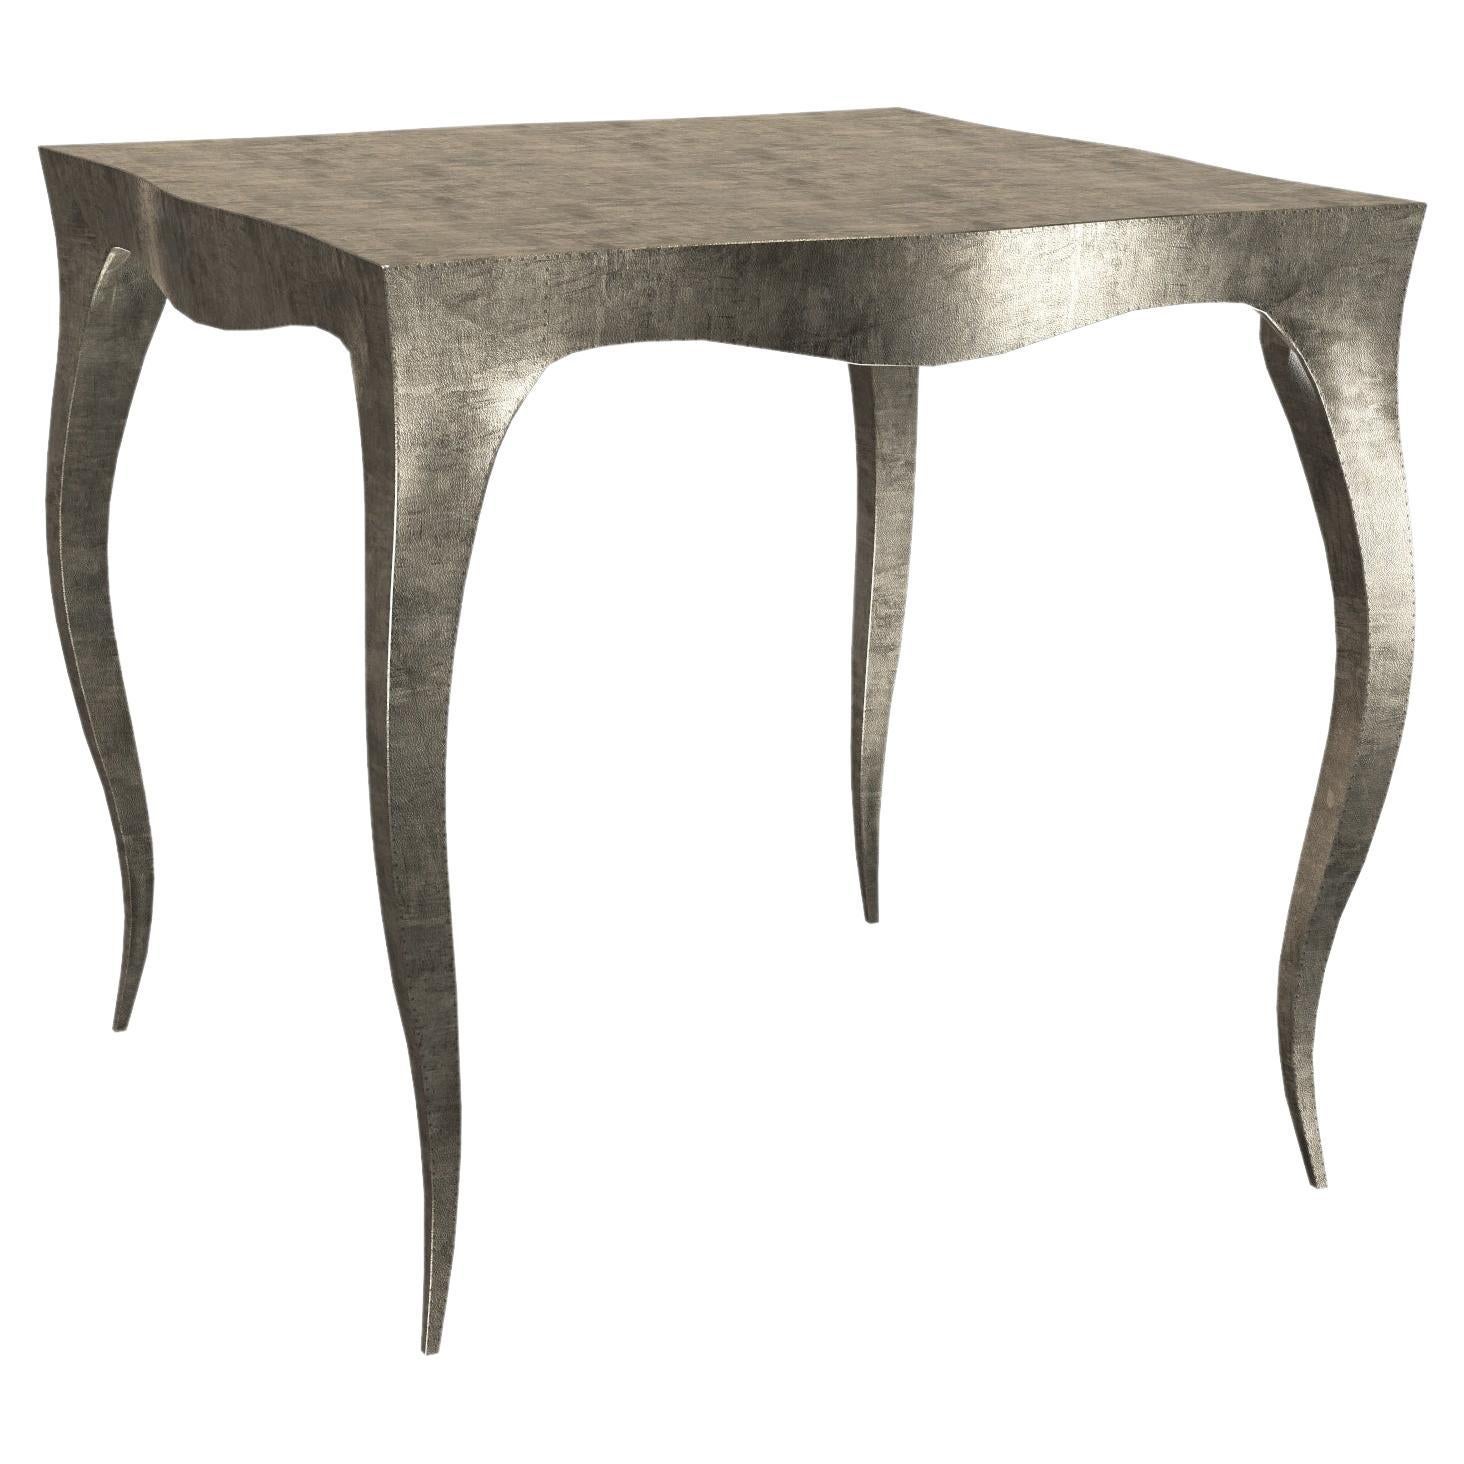 Other Louise Art Nouveau Vanities Tables Mid. Hammered Antique Bronze by Paul Mathieu For Sale